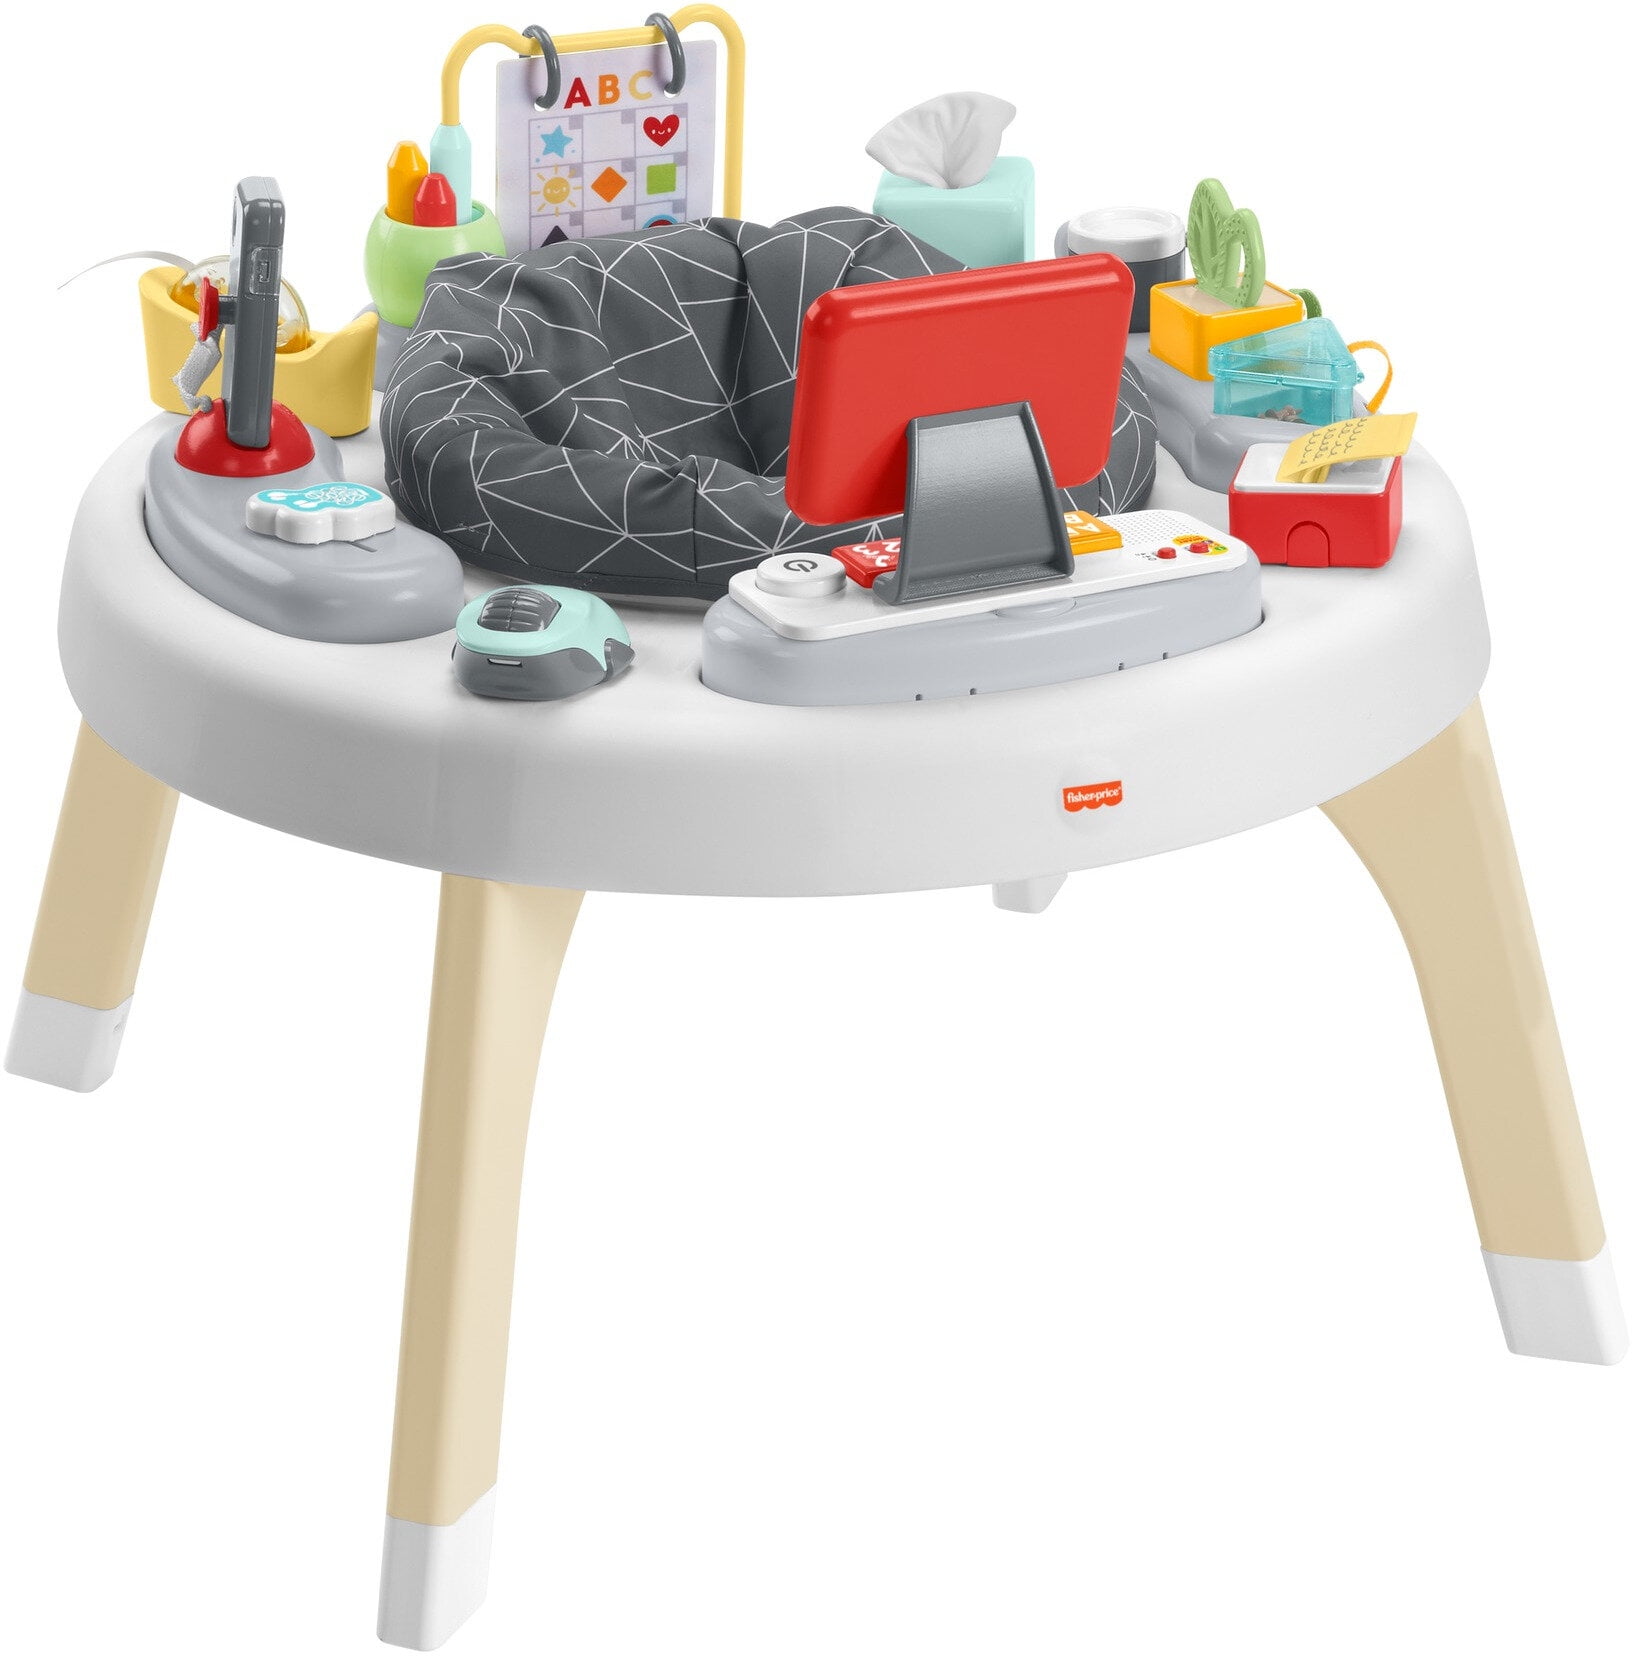 Fisher-Price 2-in-1 Like A Boss Activity Center, Baby Entertainer